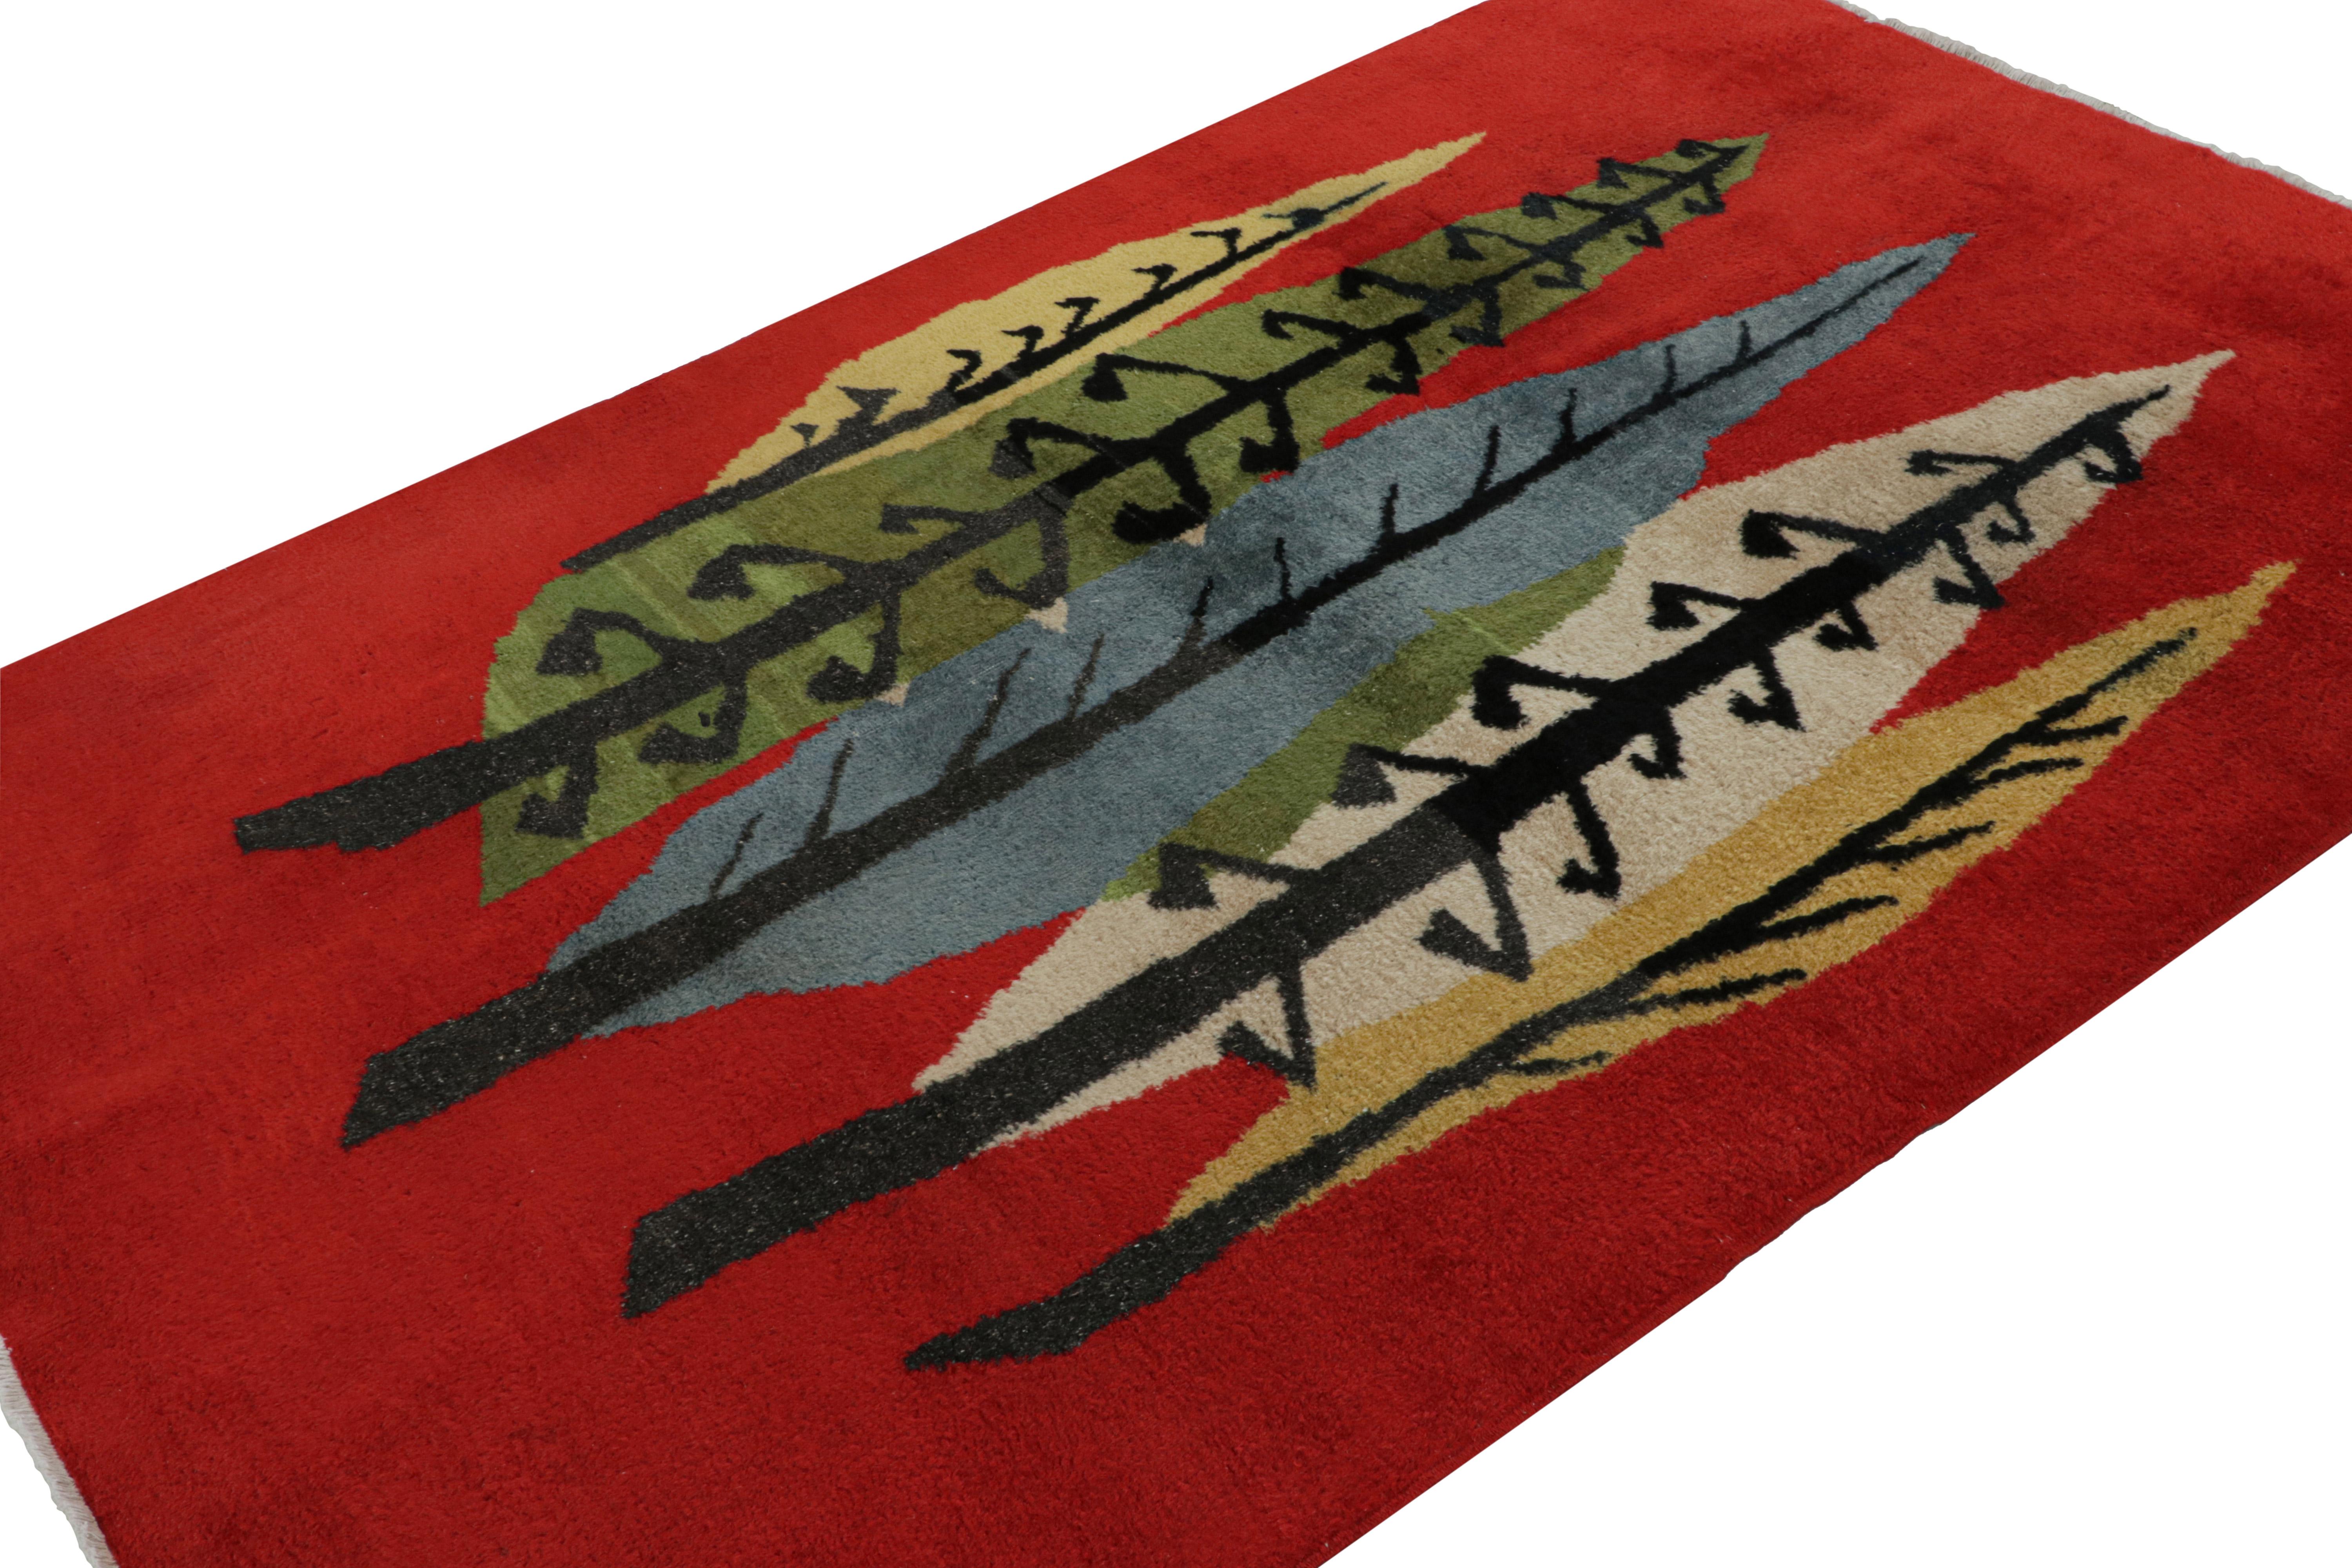 Hand-knotted in wool, circa 1960 - 1970, this 5x8 vintage Müren Art Deco rug drawn on primitivist tribal and Scandinavian Rya styles in its big colorful leaves’ pattern in green, blue and beige/brown. 

On the Design:  

Connoisseurs will appreciate